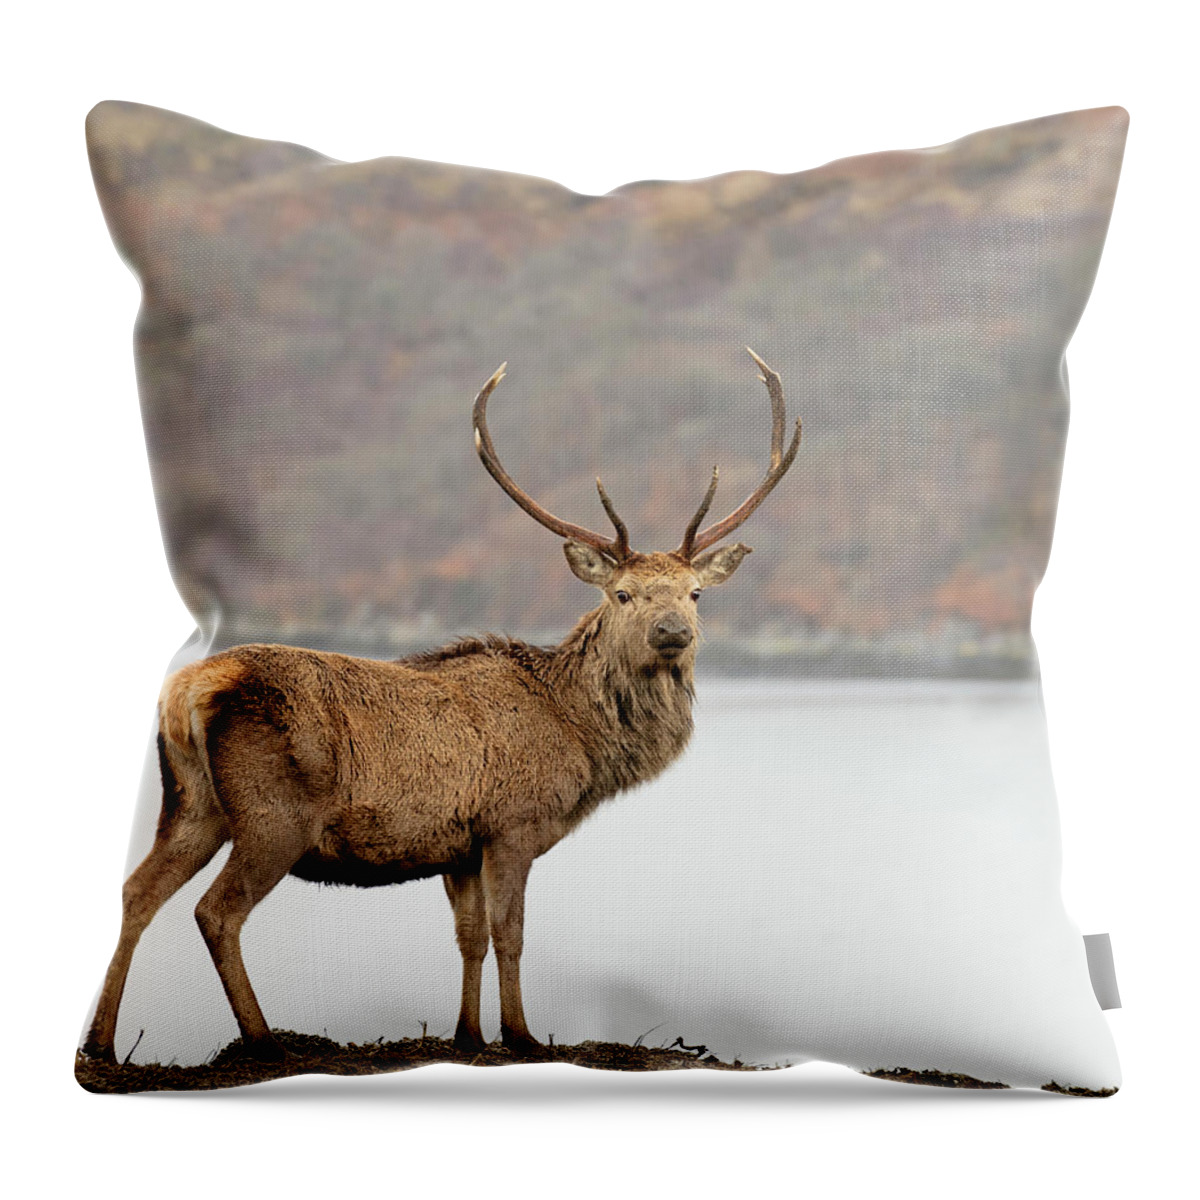 Scenics Throw Pillow featuring the photograph Wild Scottish Red Deer Stag by Georgeclerk